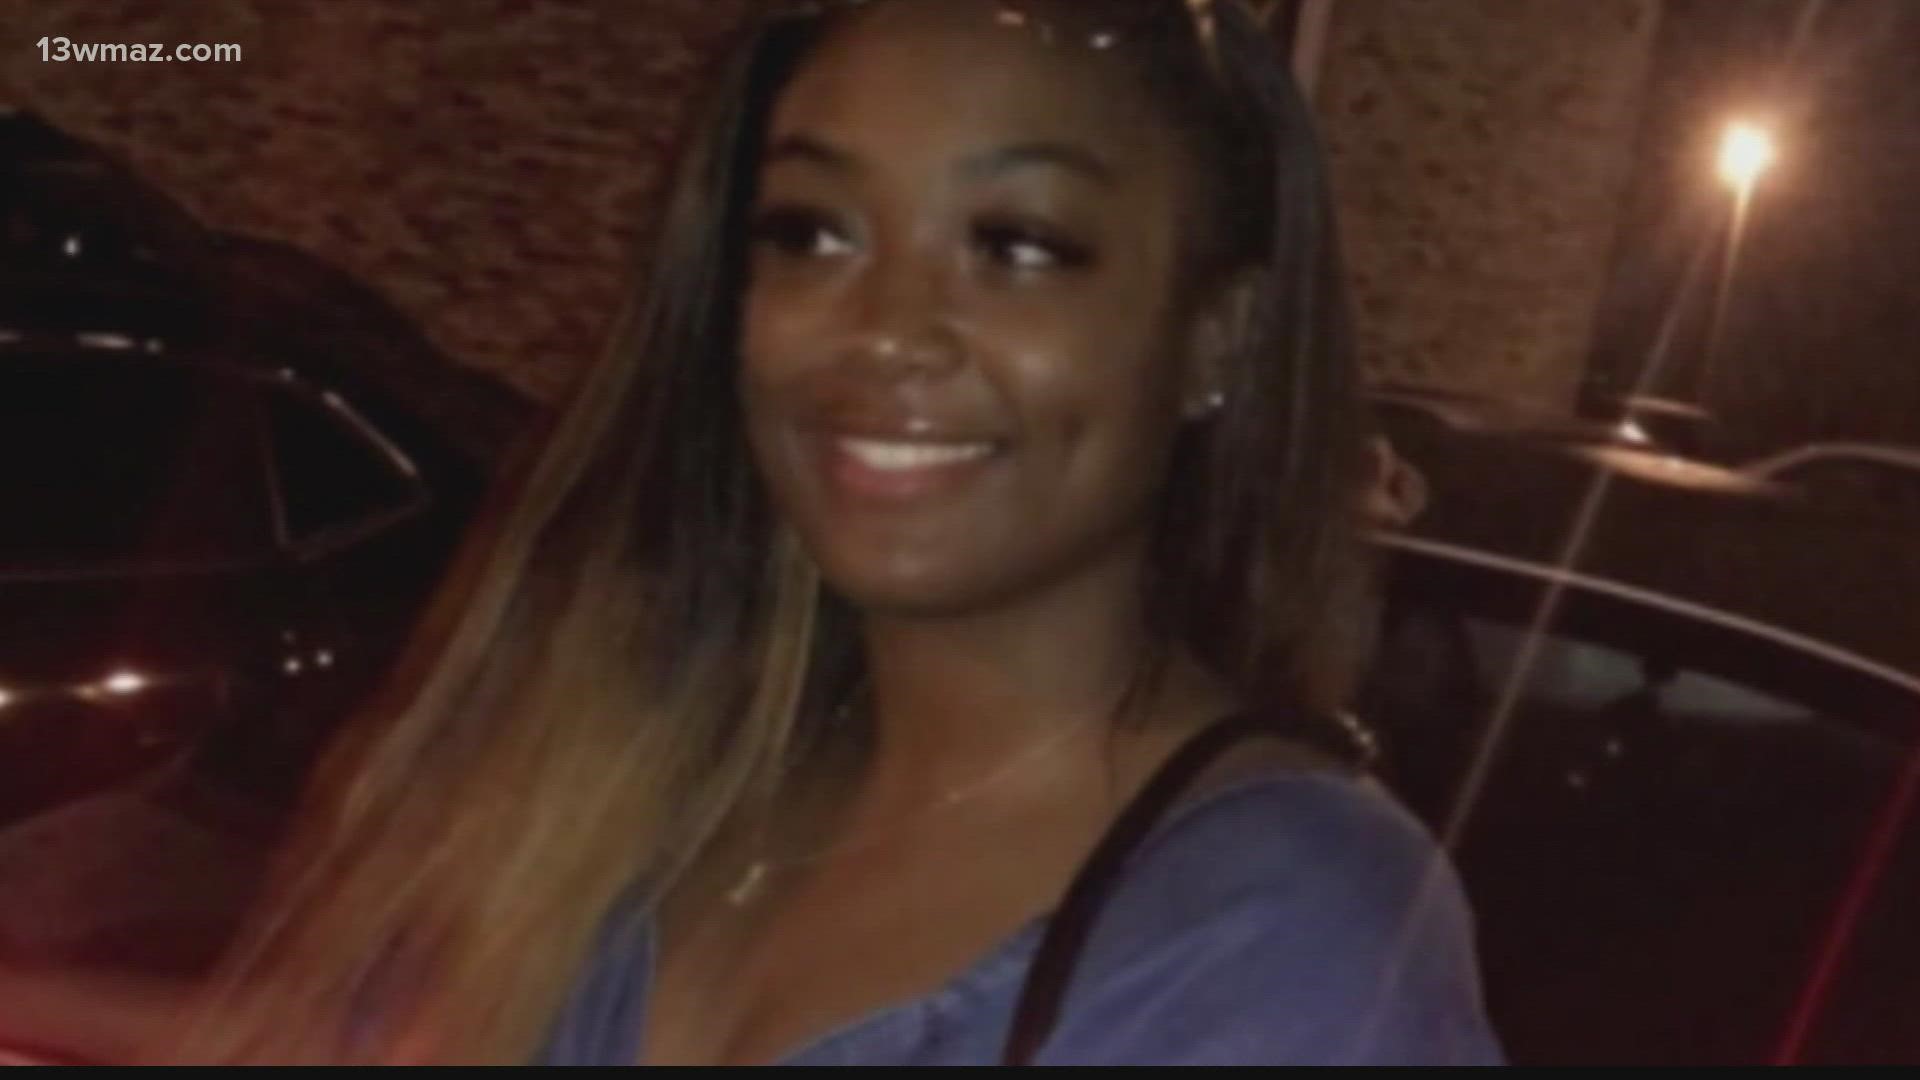 Her boyfriend, Demarcus Little, is scheduled to go on trial this week – two years after her death by strangulation.